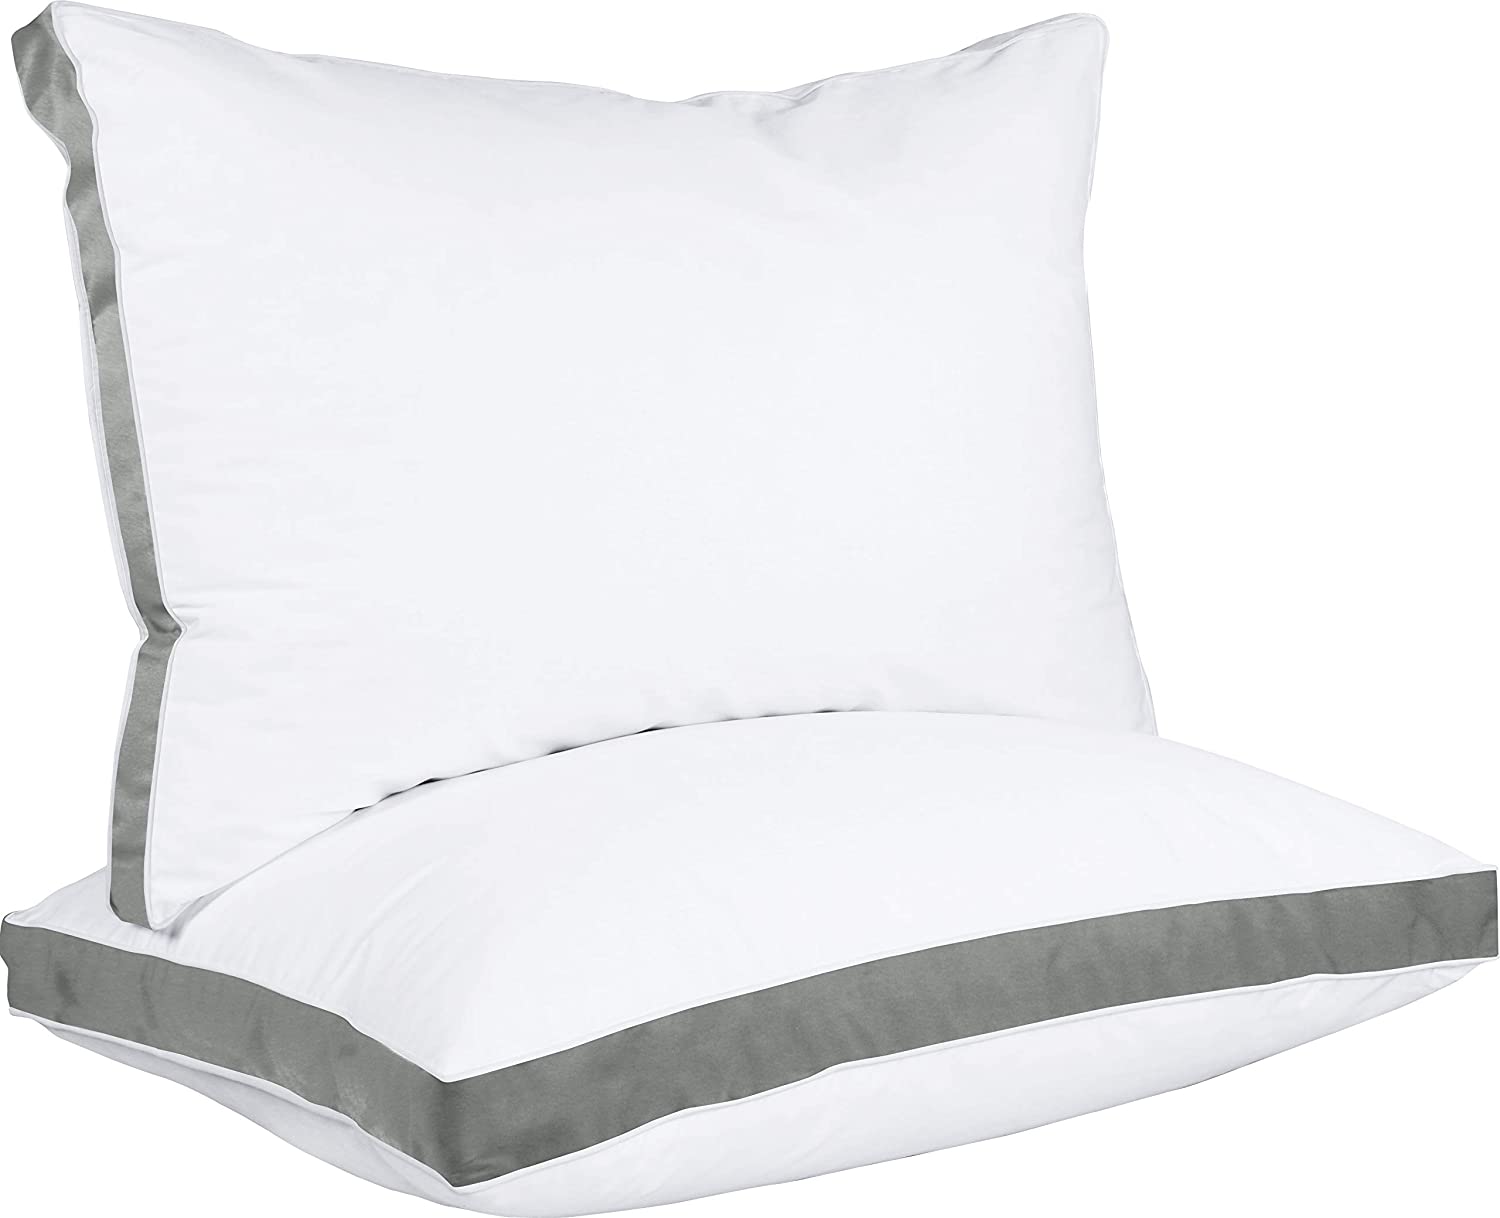 Utopia Bedding Throw Pillows Insert (Pack of 2, White) - 22 x 22 Inches Bed  and Couch Pillows - Indoor Decorative Pillows 